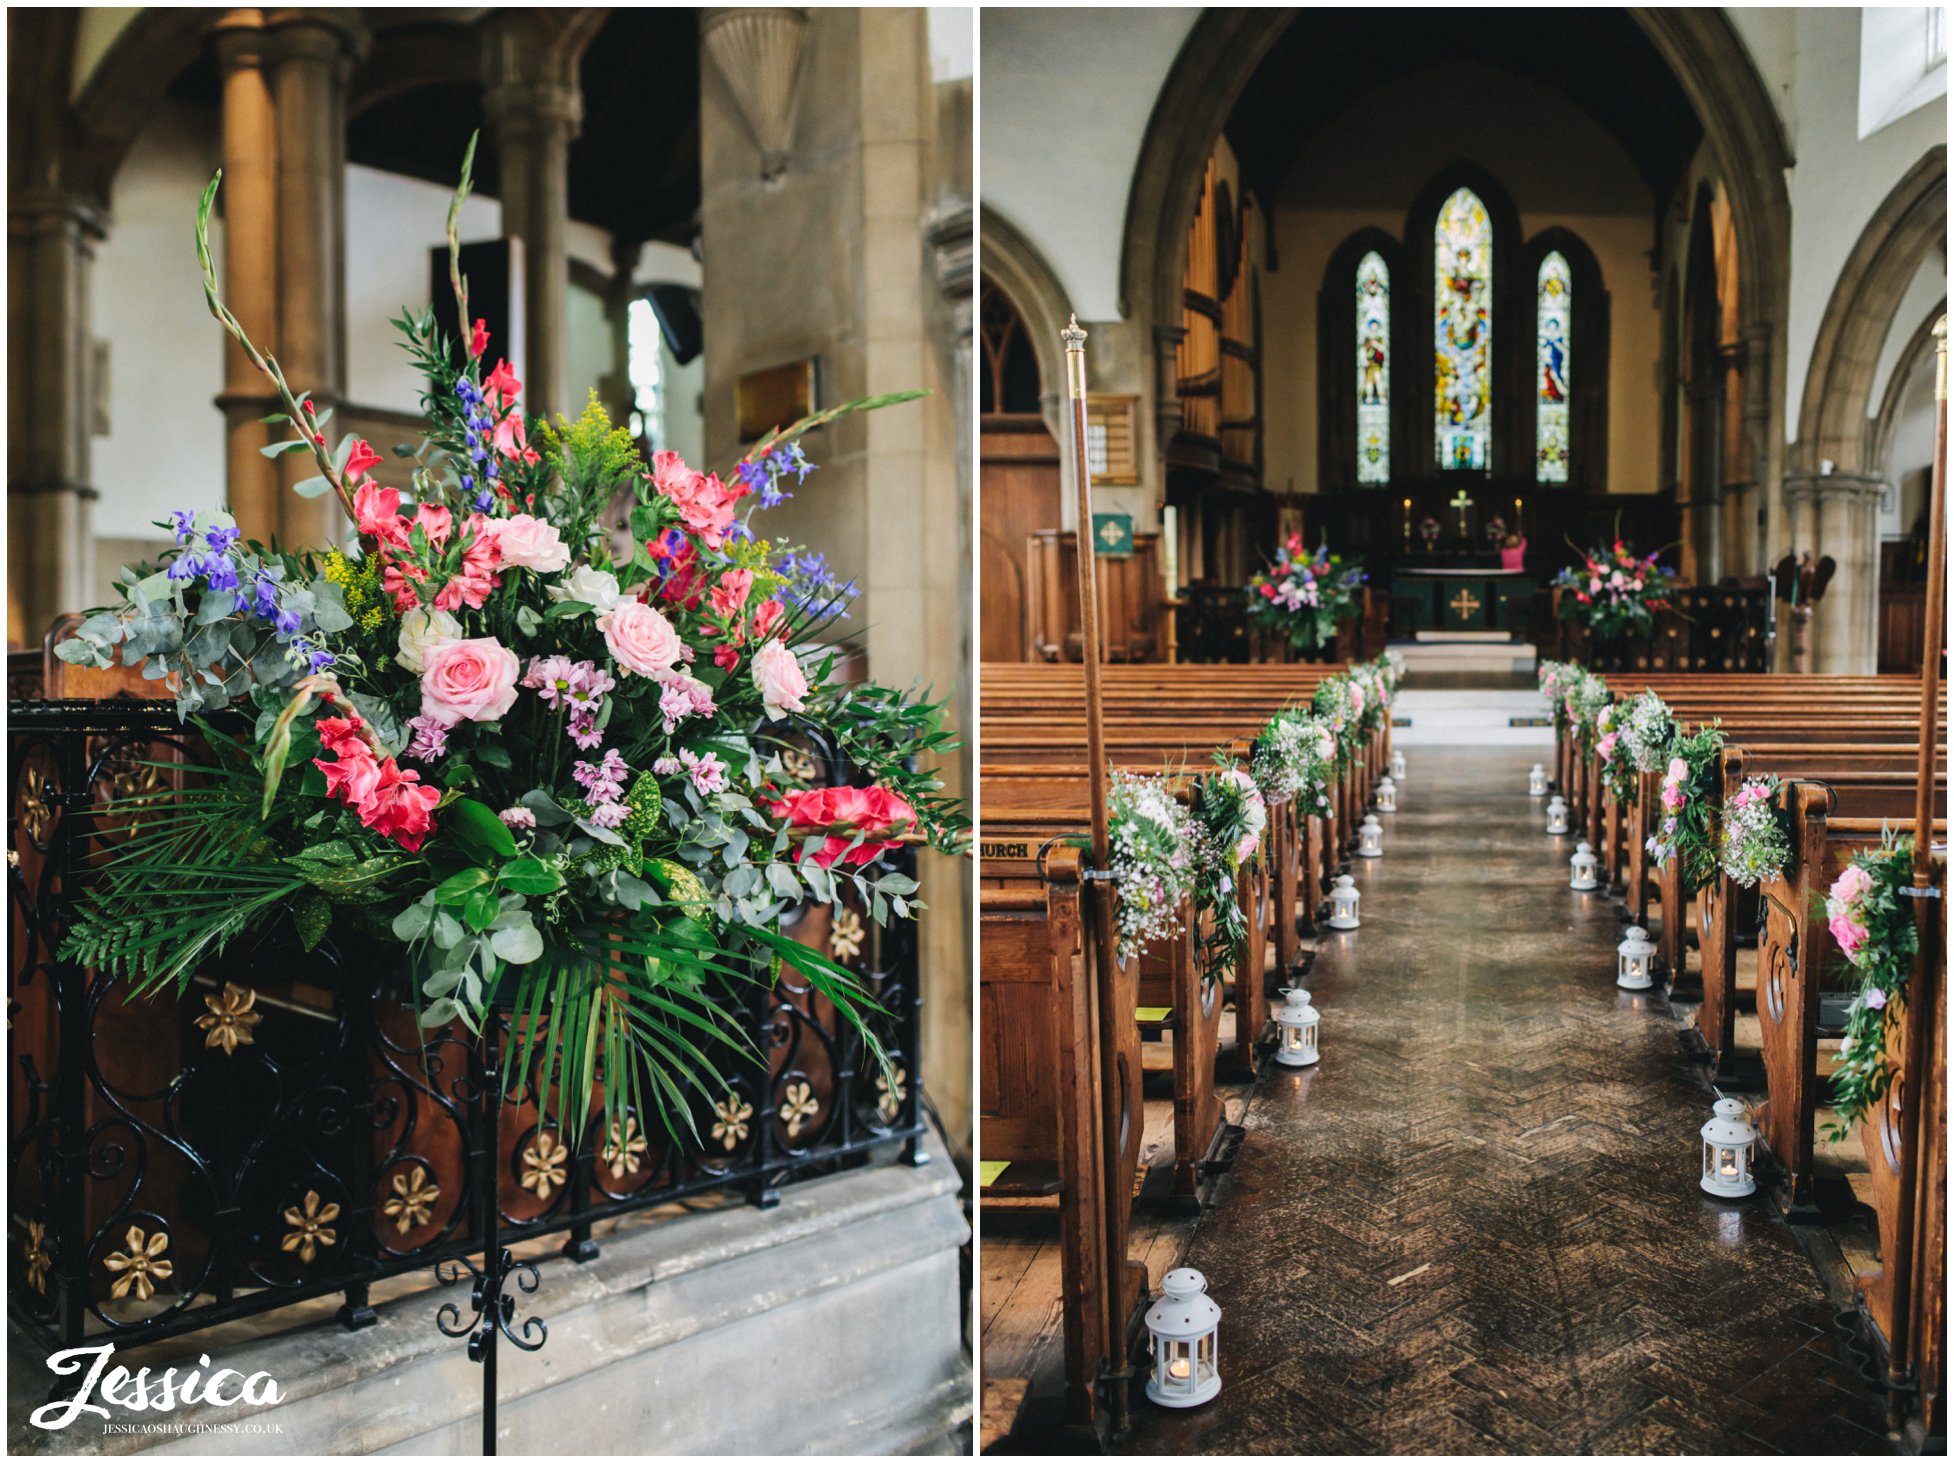 brighly coloured flowers decorate the church 